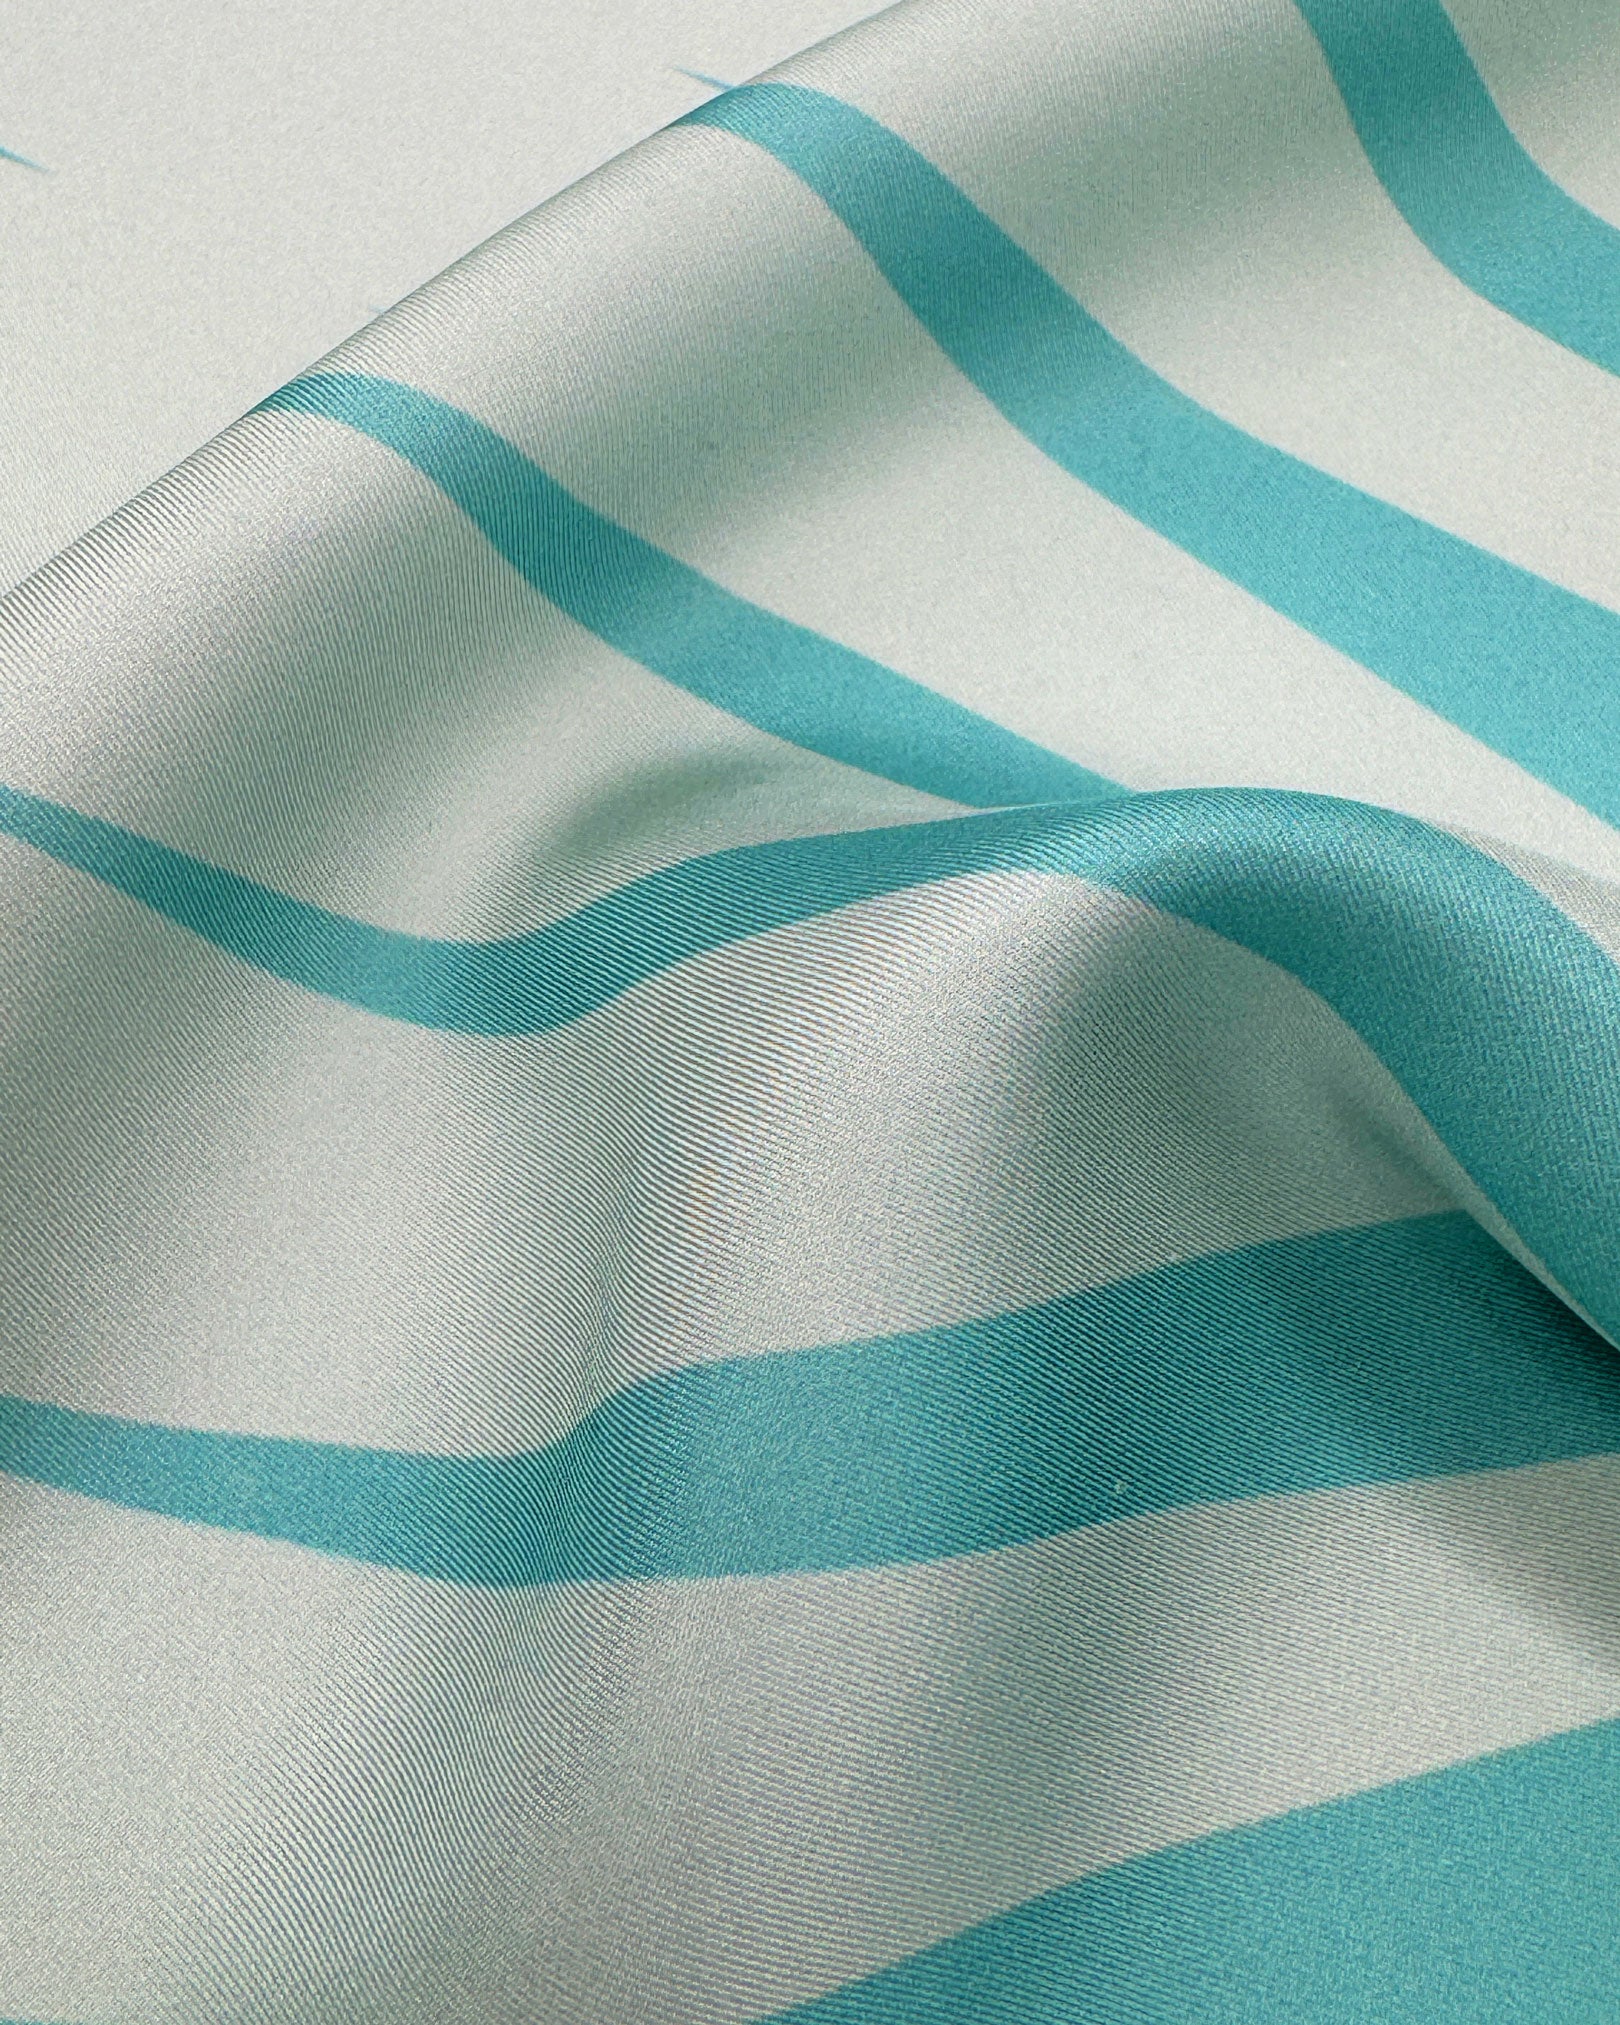 A ruffled close-up of the 'Hamburg' silk pocket square, presenting a closer view of the waveform-like motif of teal and turquoise.